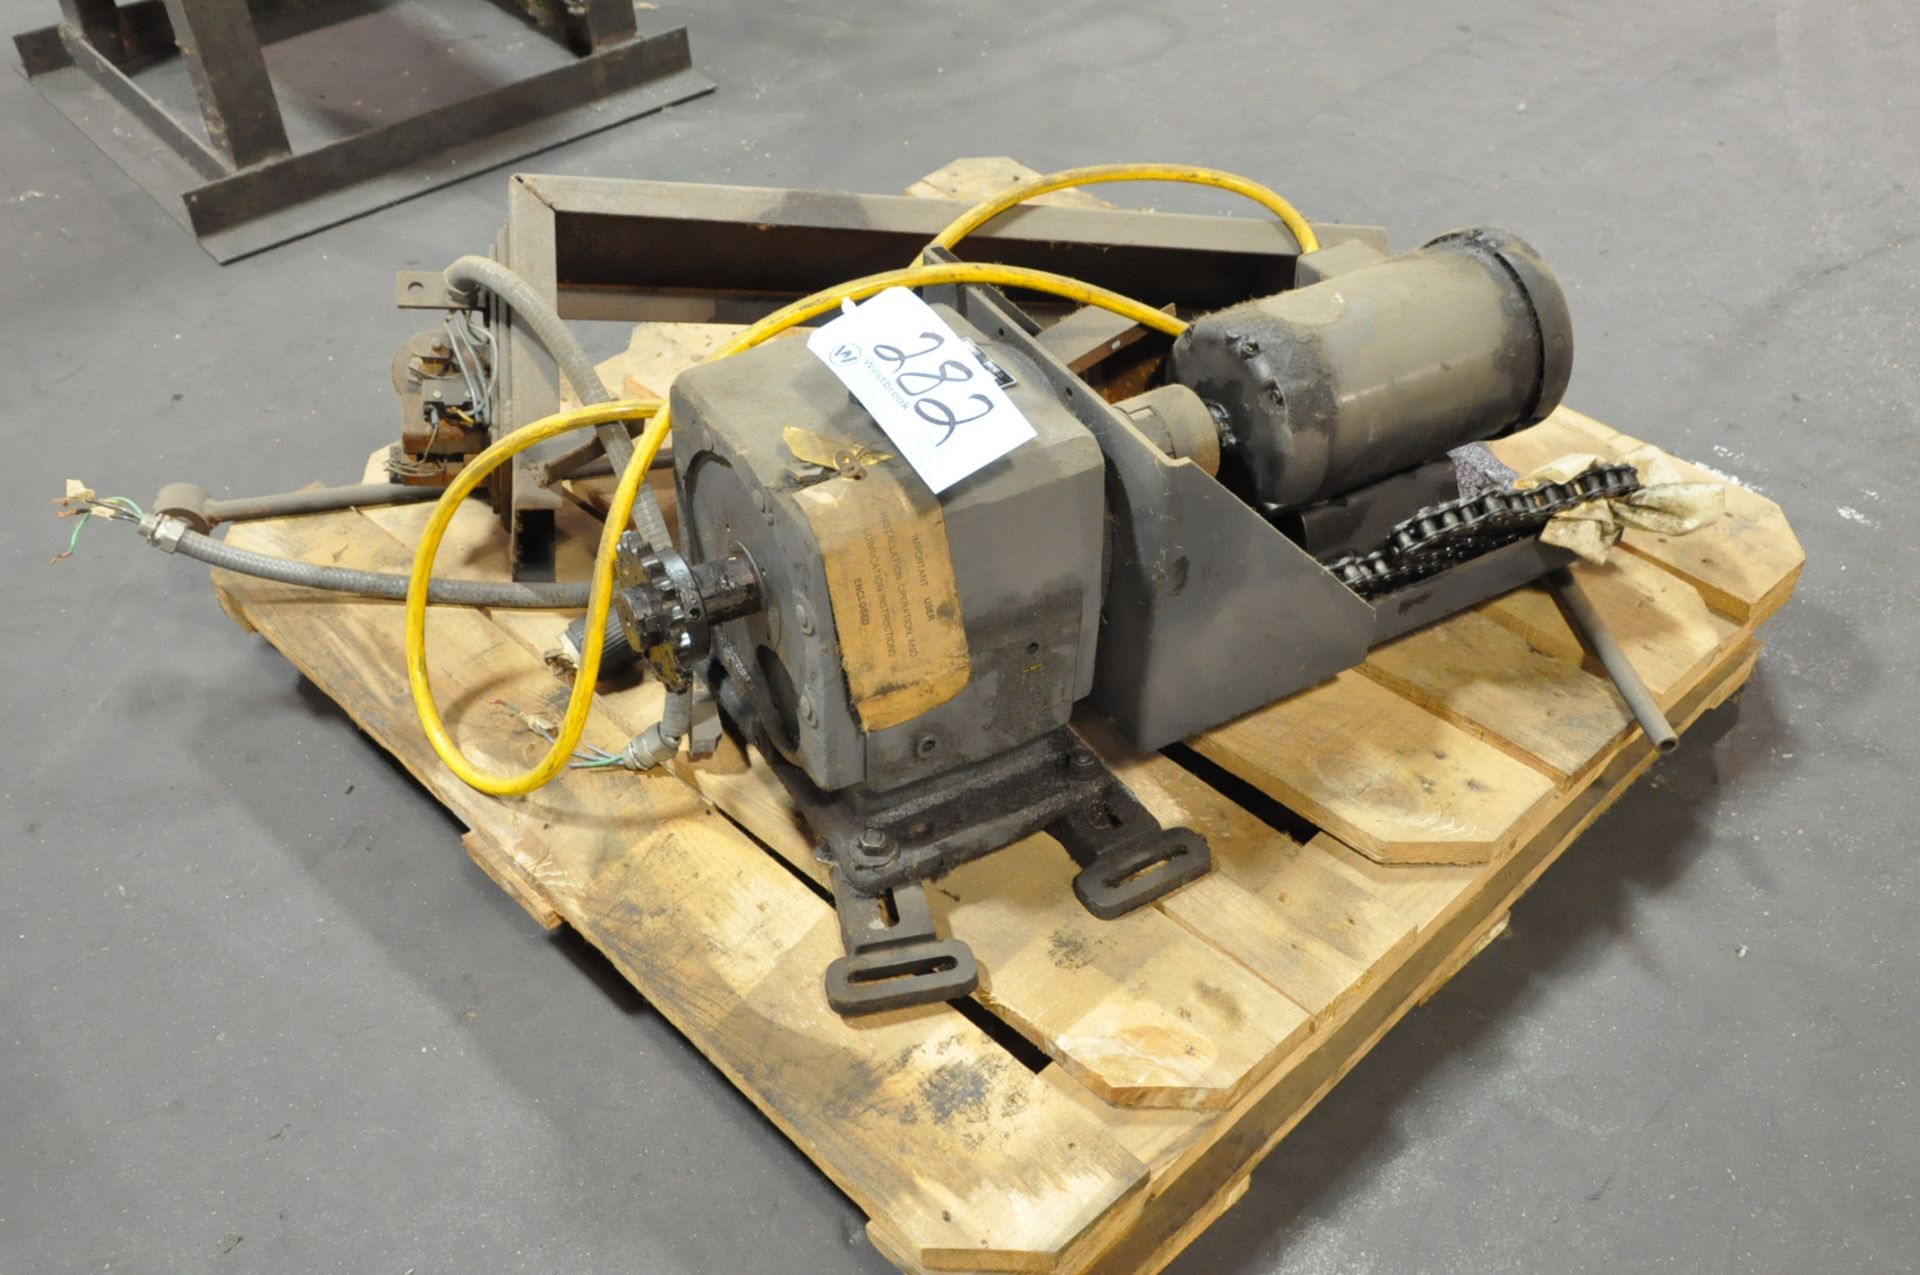 Winsmith Winline Conveyor Gearbox and Motor 4.29-HP on (1) Pallet